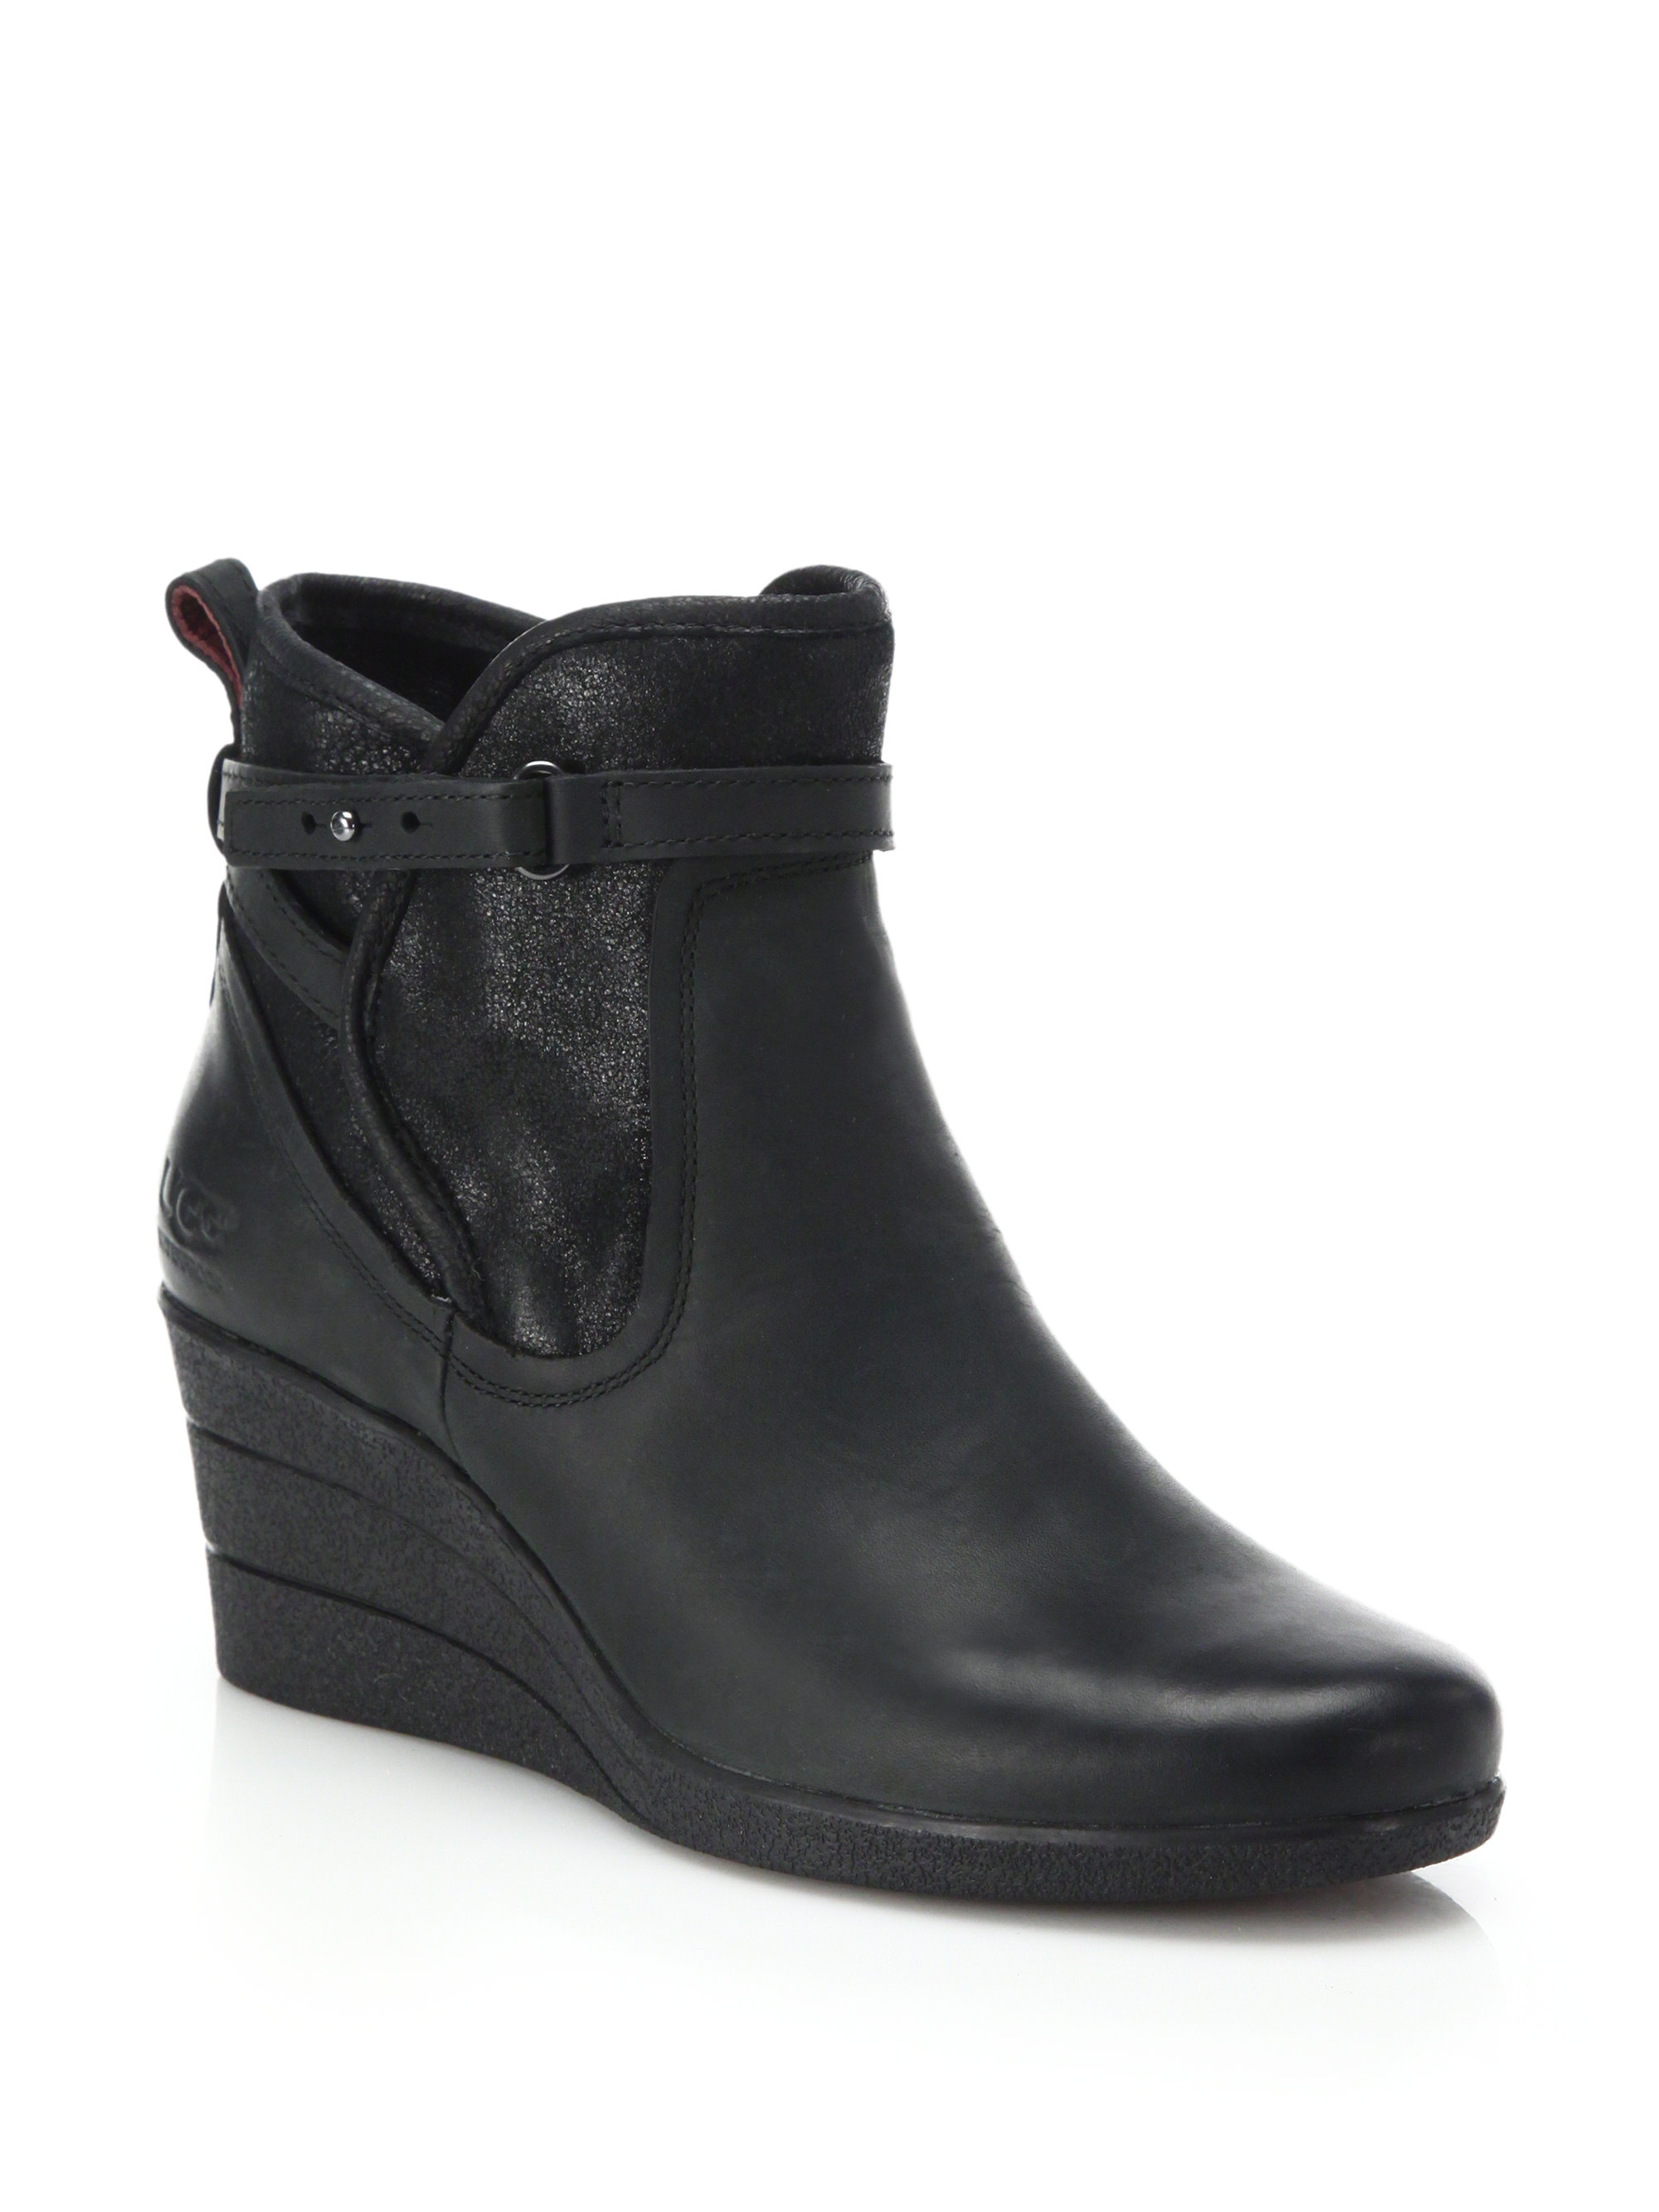 UGG Uptown Emalie Leather Wedge Boots in Black - Lyst